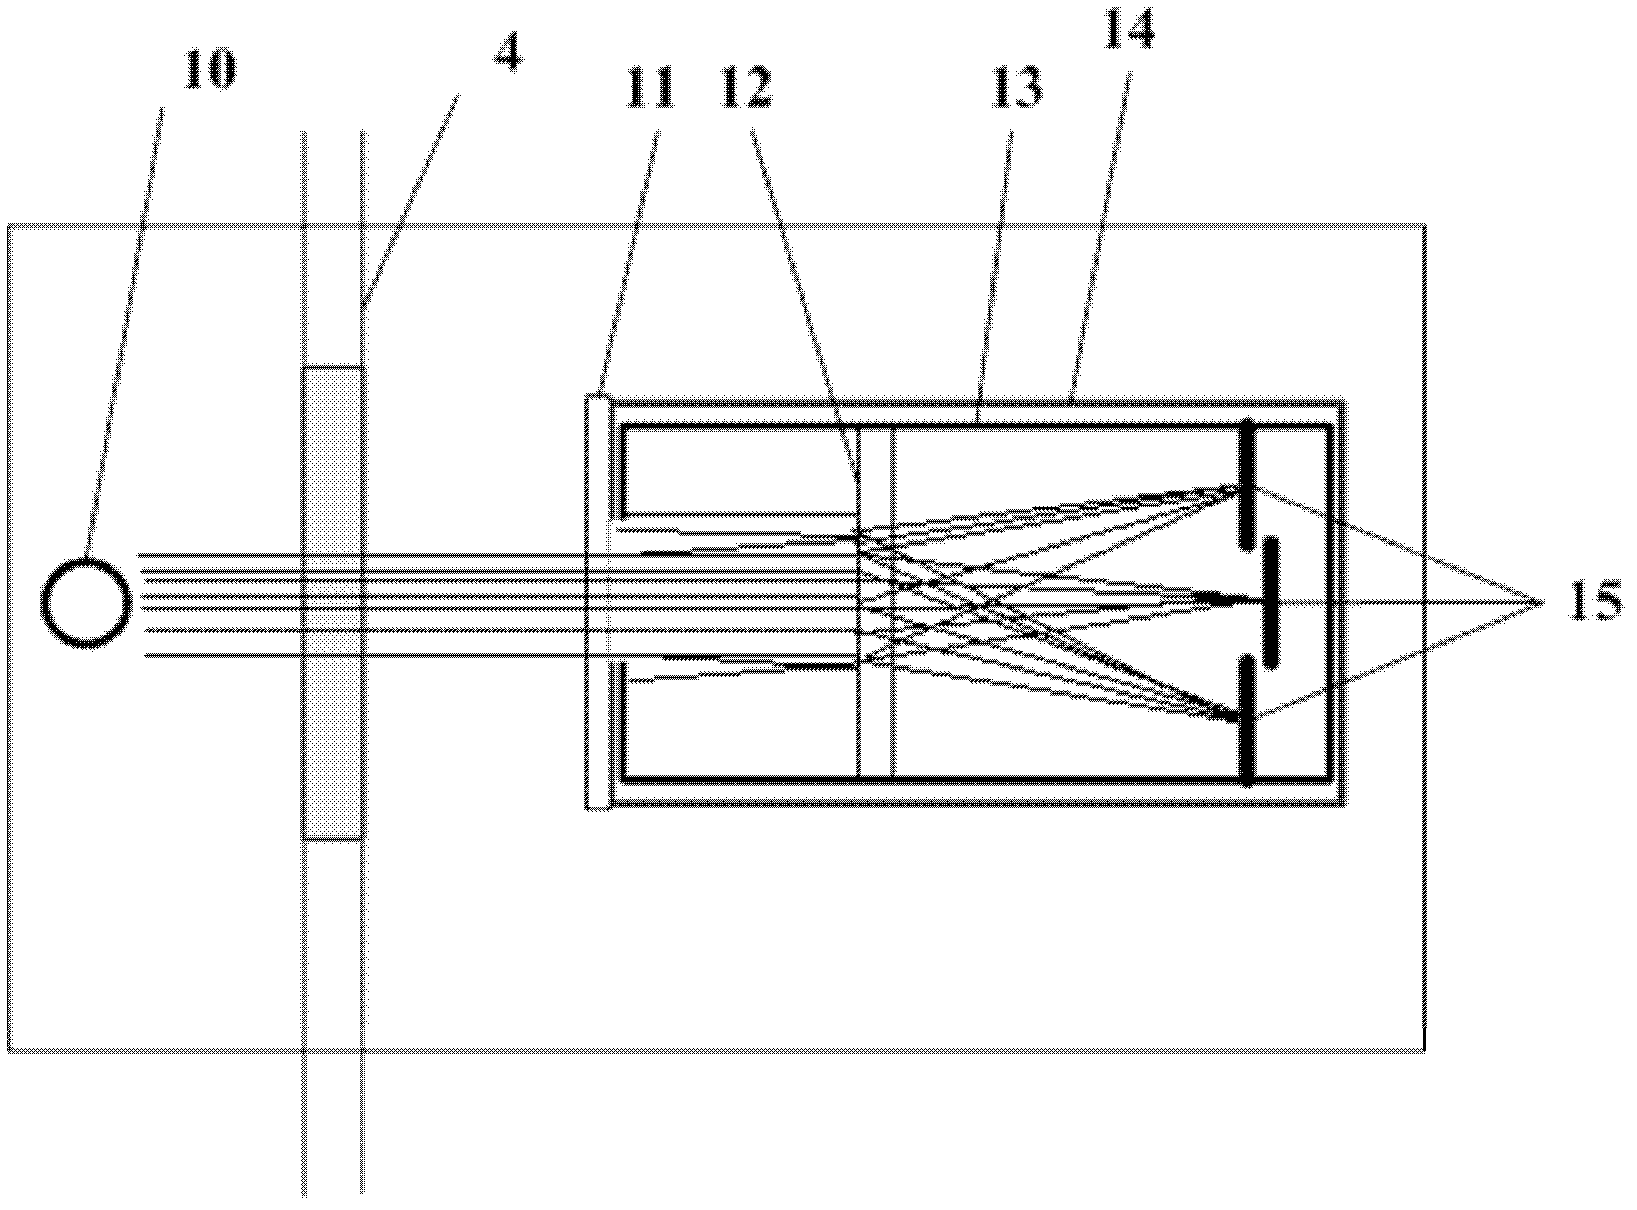 Negative pressure wound treatment system capable of detecting transparency of wound exudate